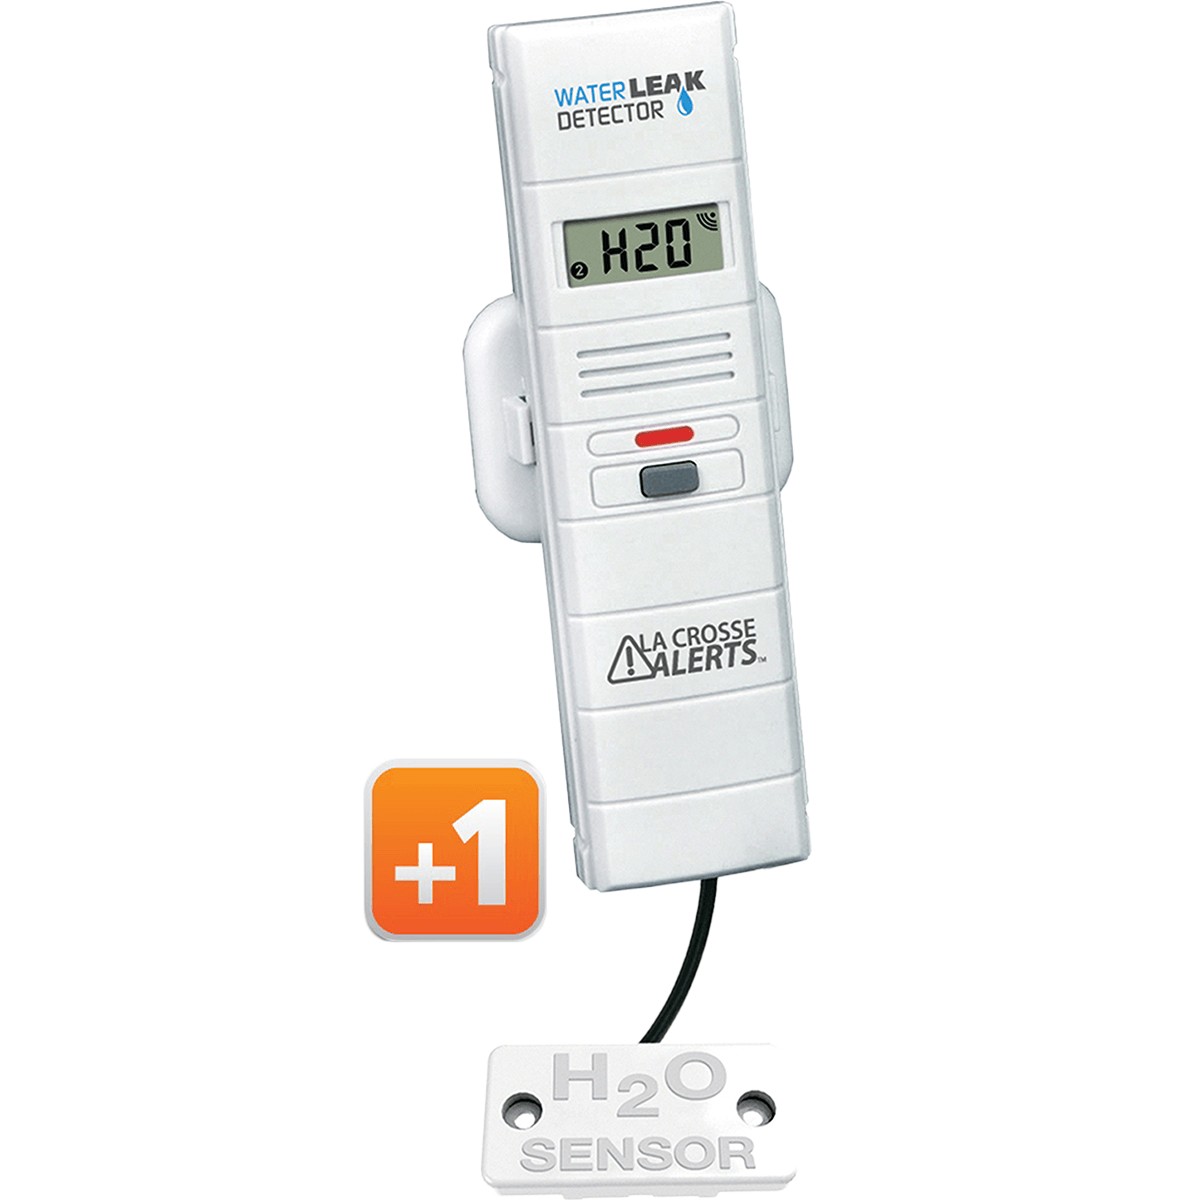 926-25005-gb Remote Water Leak Detector With Early Warning Alerts